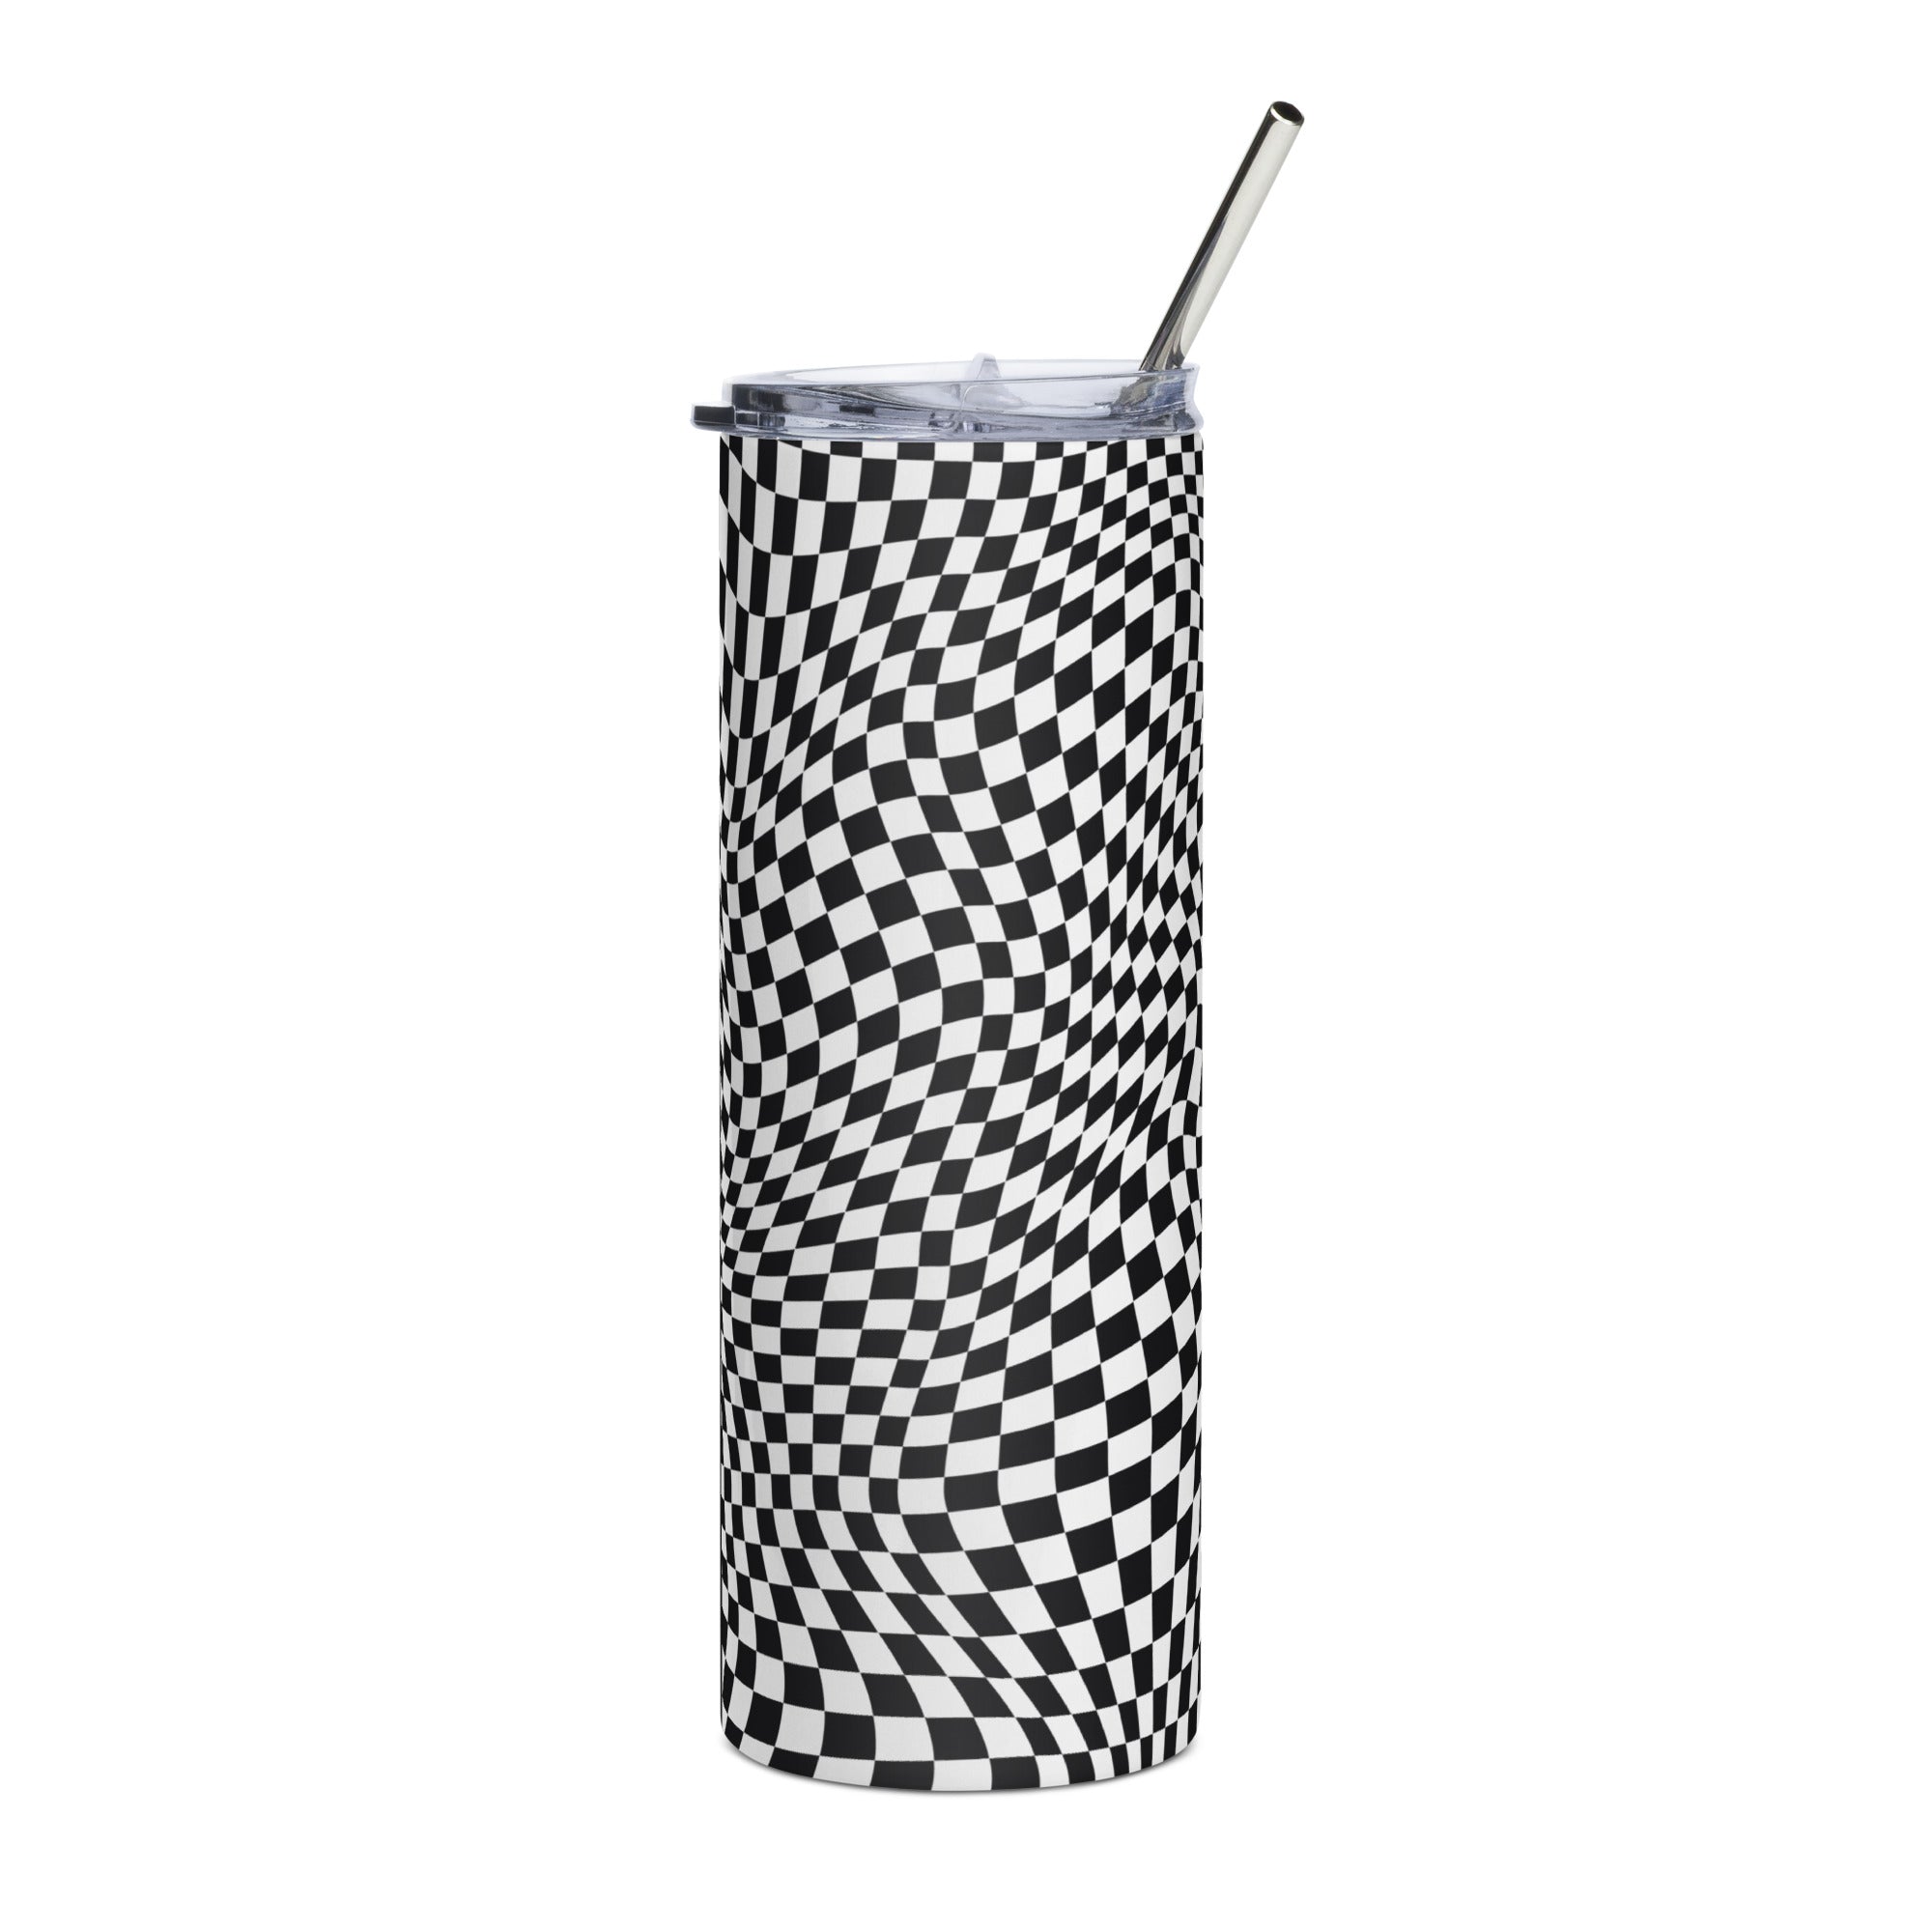 Checkered Op Art tumbler – Smarty Pants Paper Co.